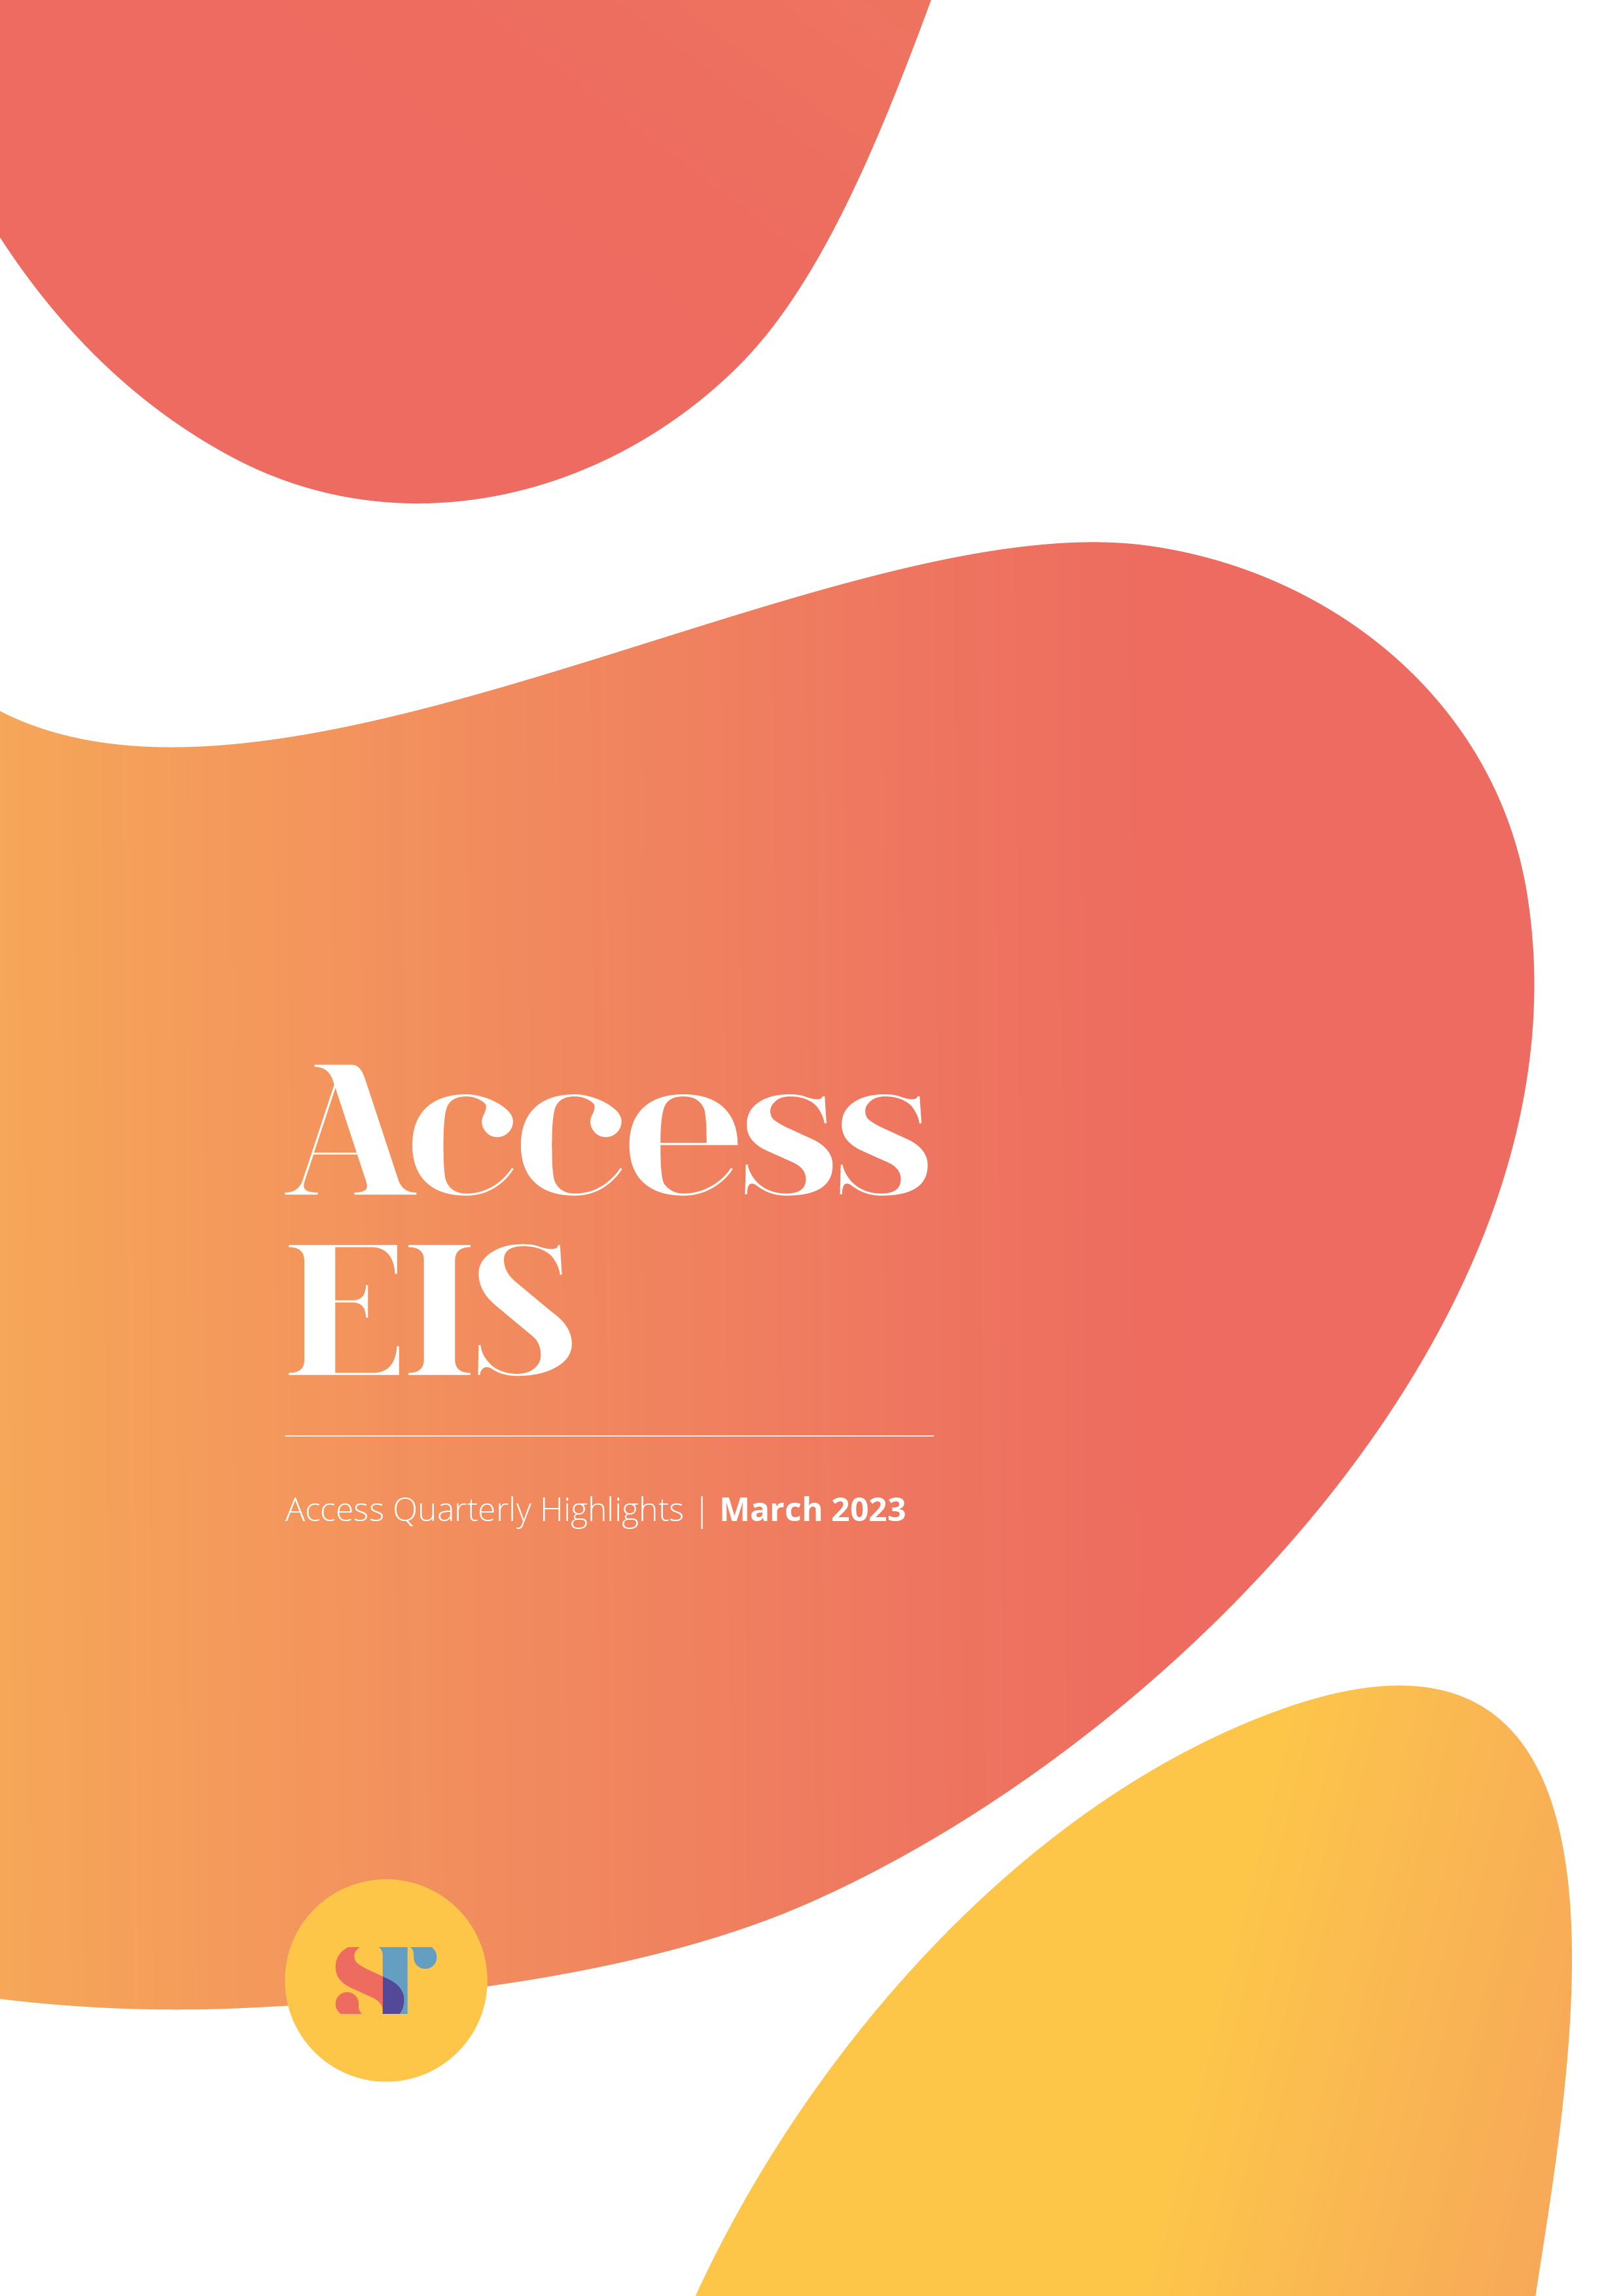 Access Quarterly Highlights March 2023